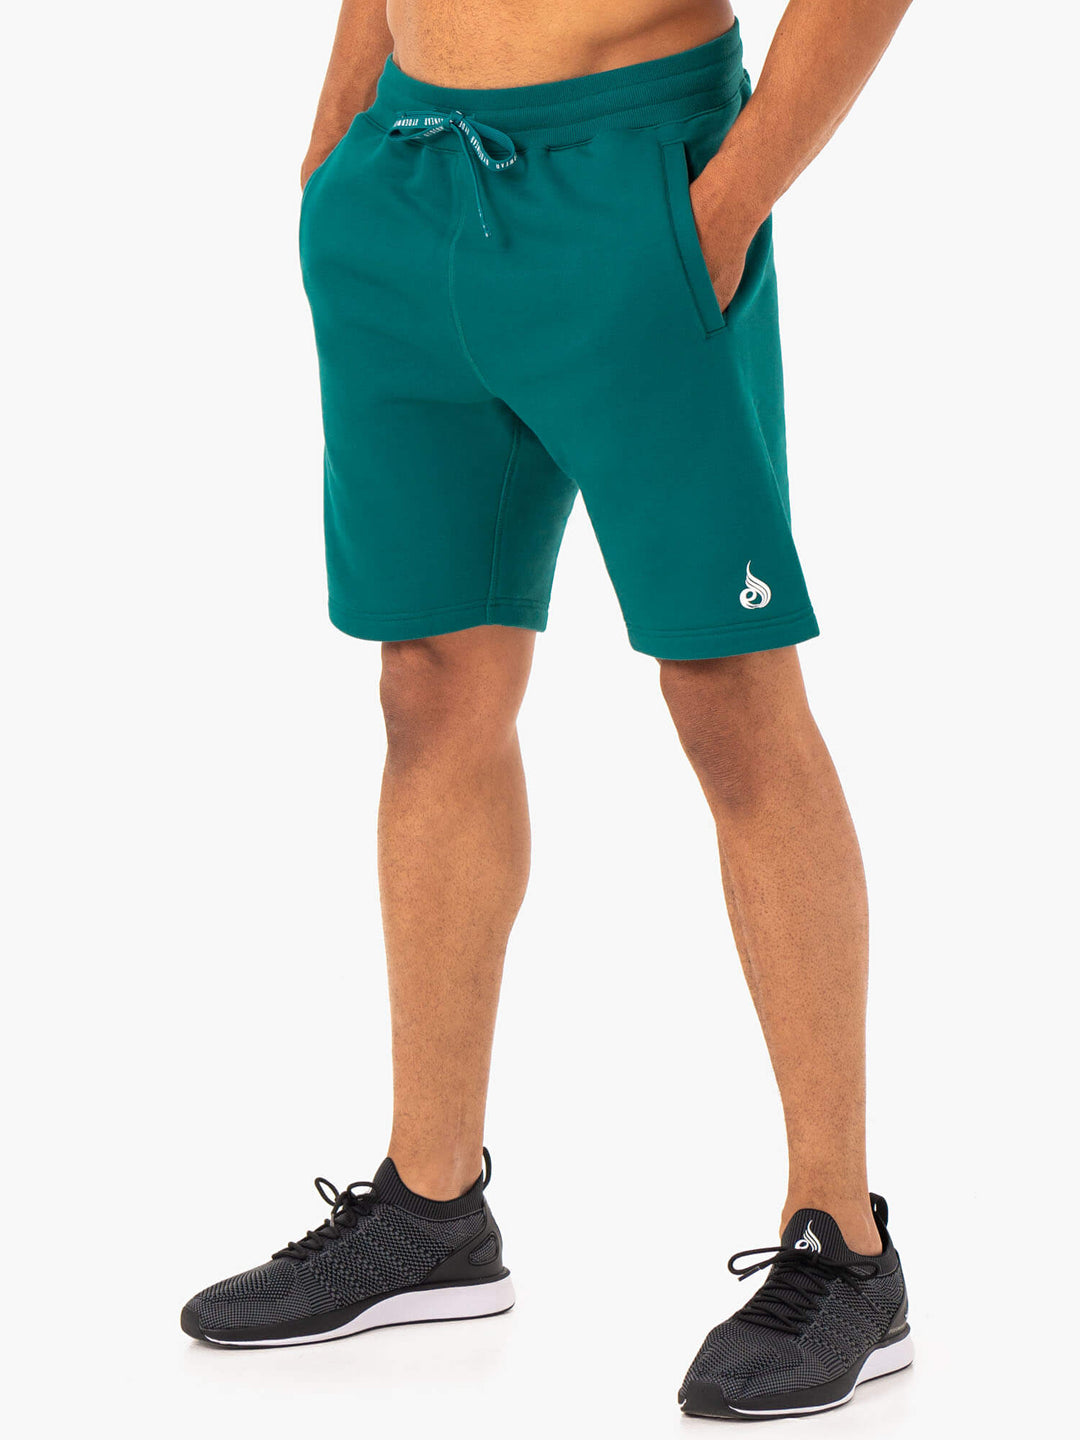 Recharge Track Short - Teal Clothing Ryderwear 